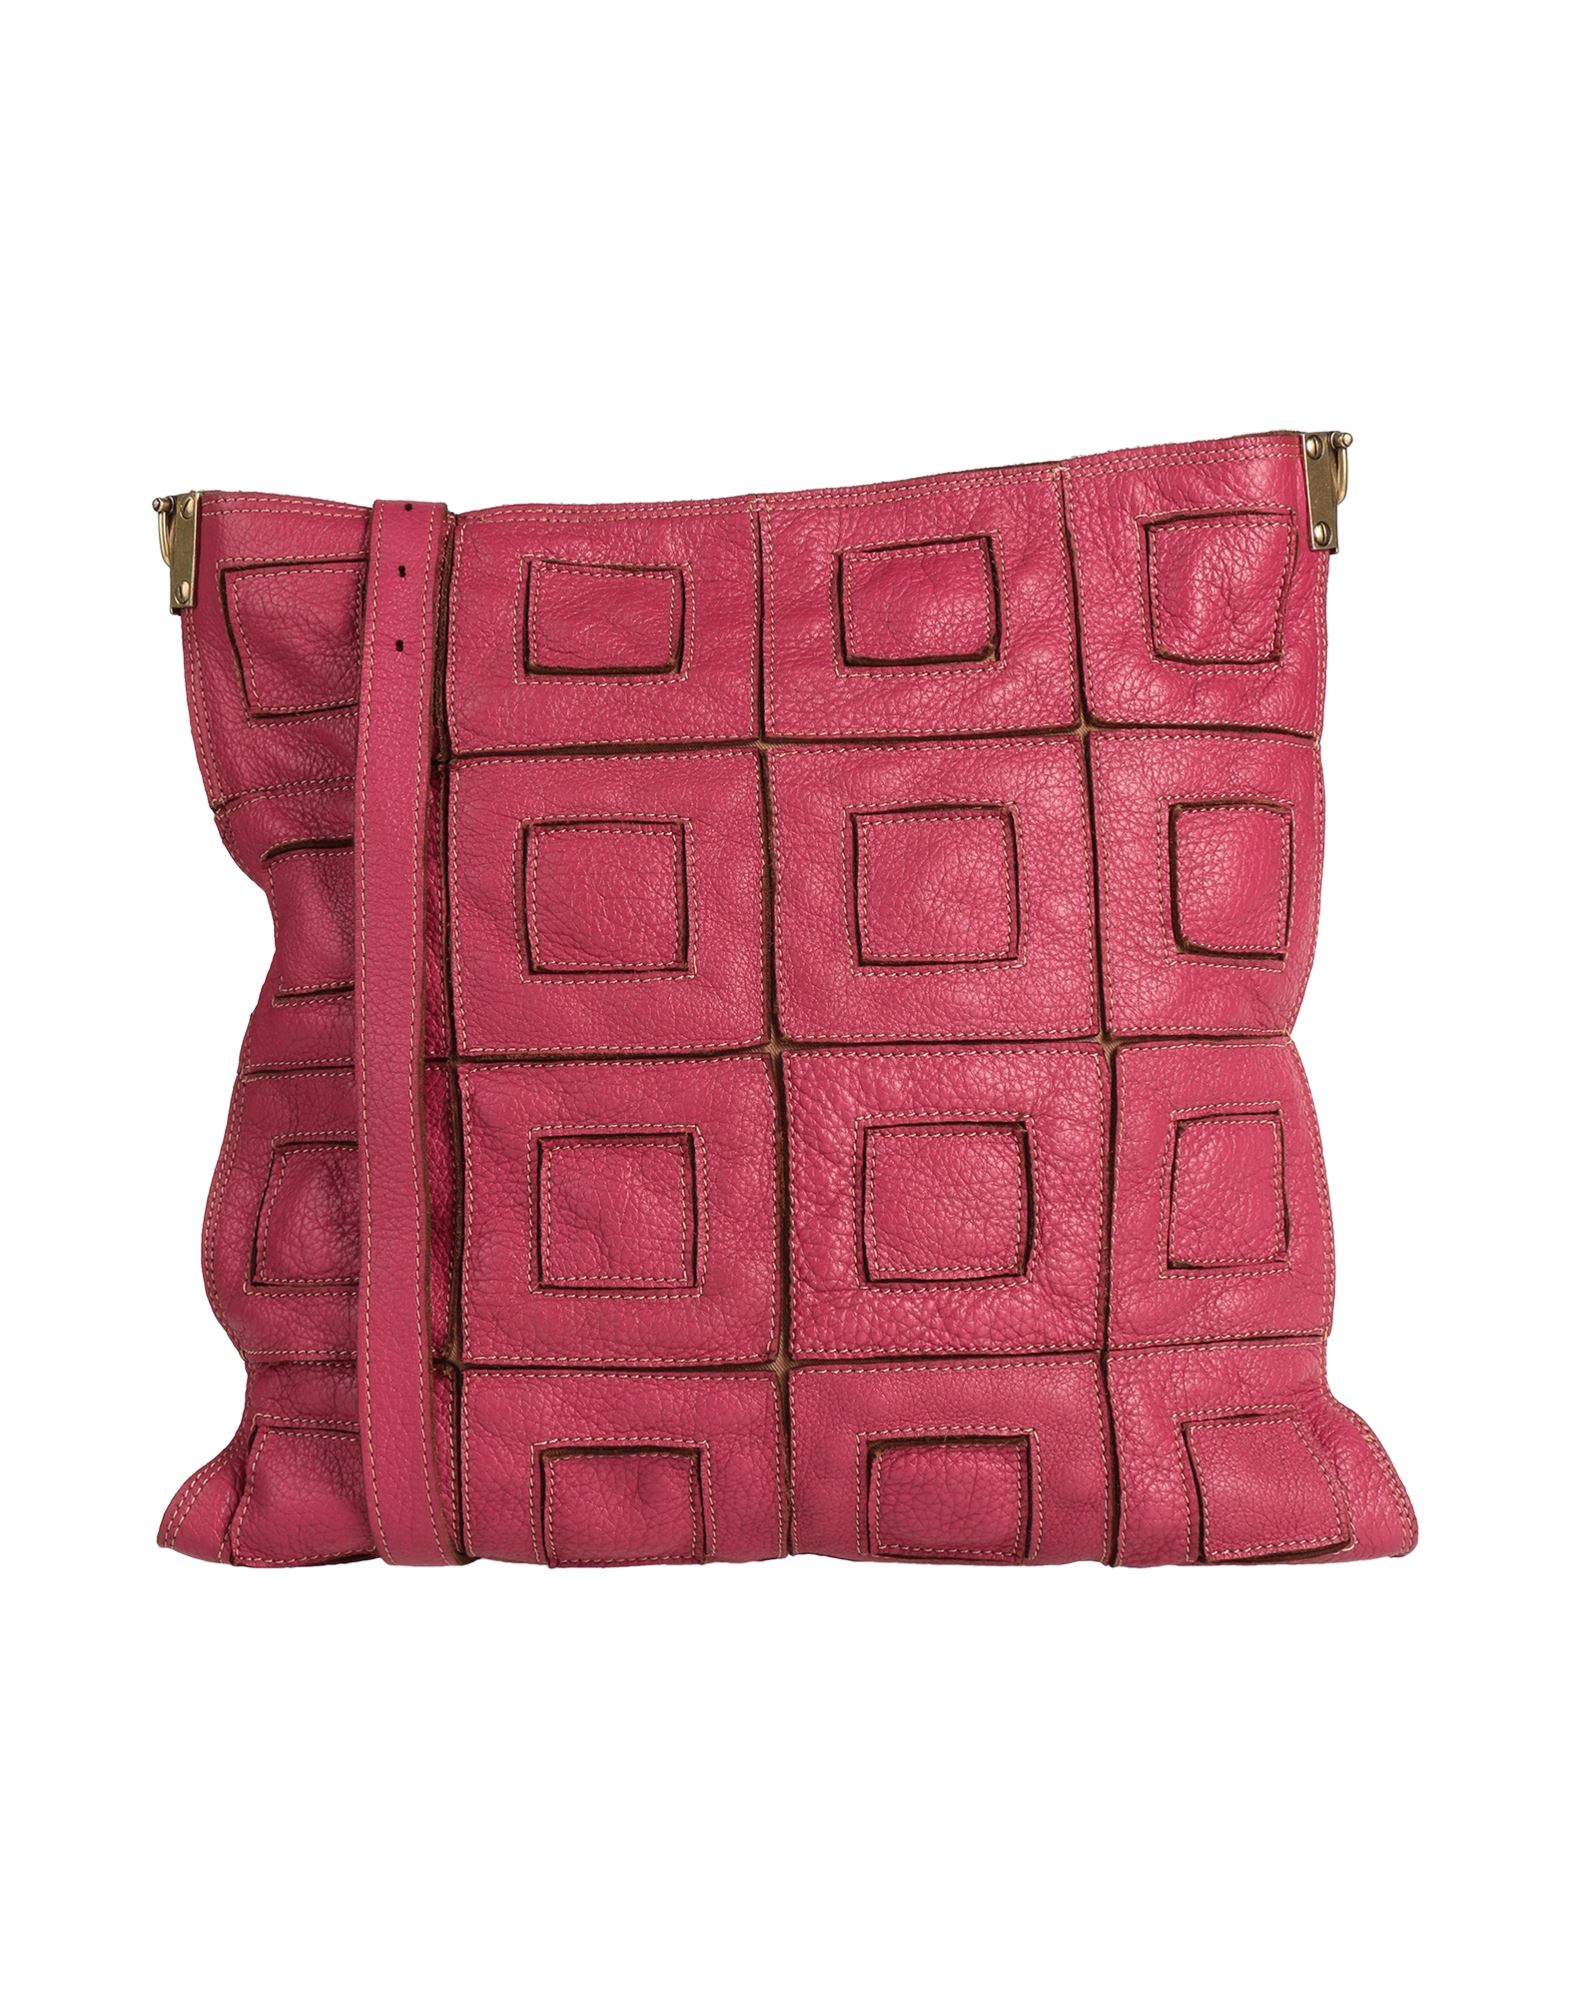 Caterina Lucchi Handbags In Pink